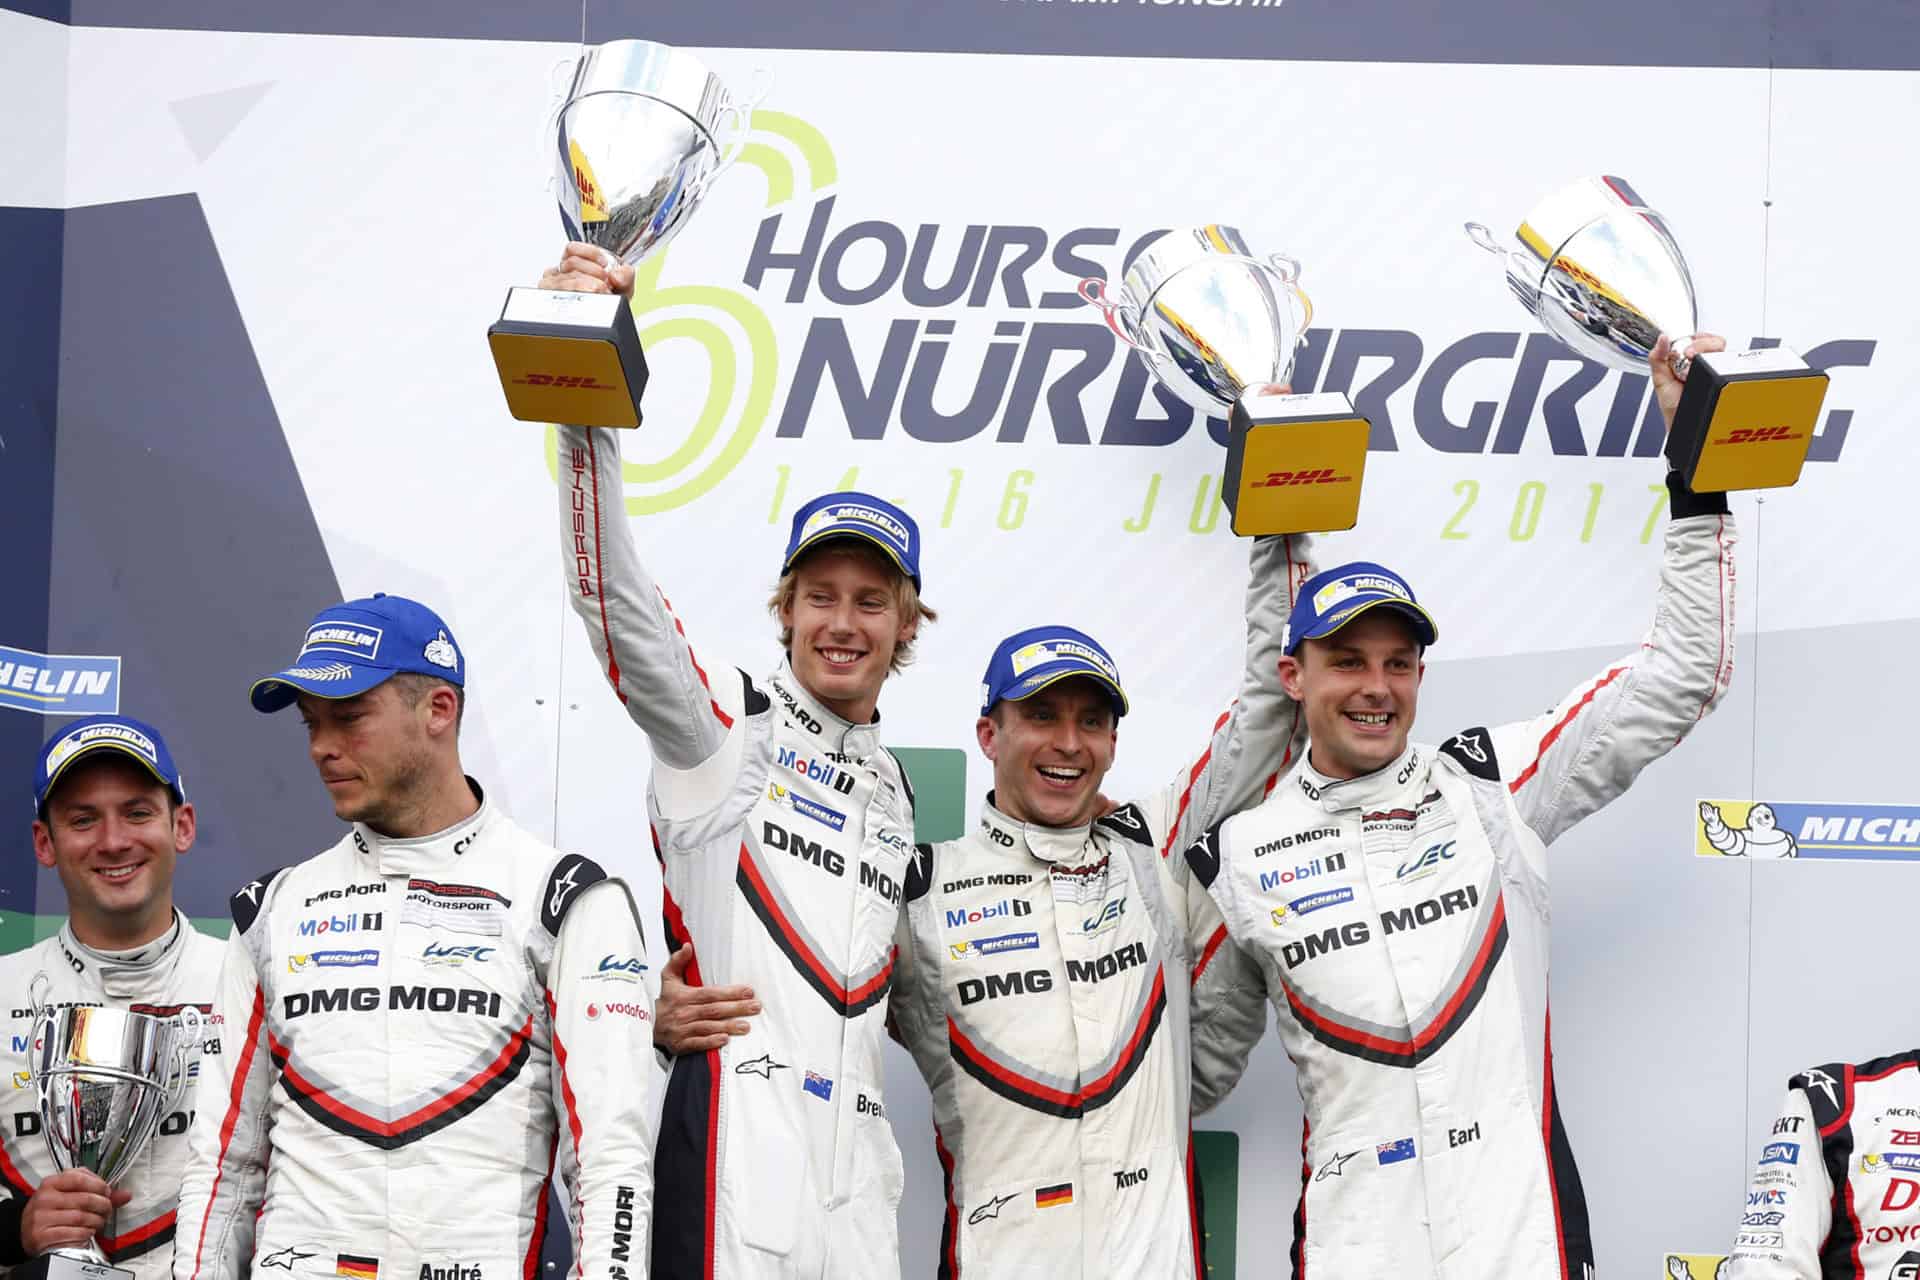 A new hattrick victory for Porsche at the 6 Hours of Nürburgring 2017